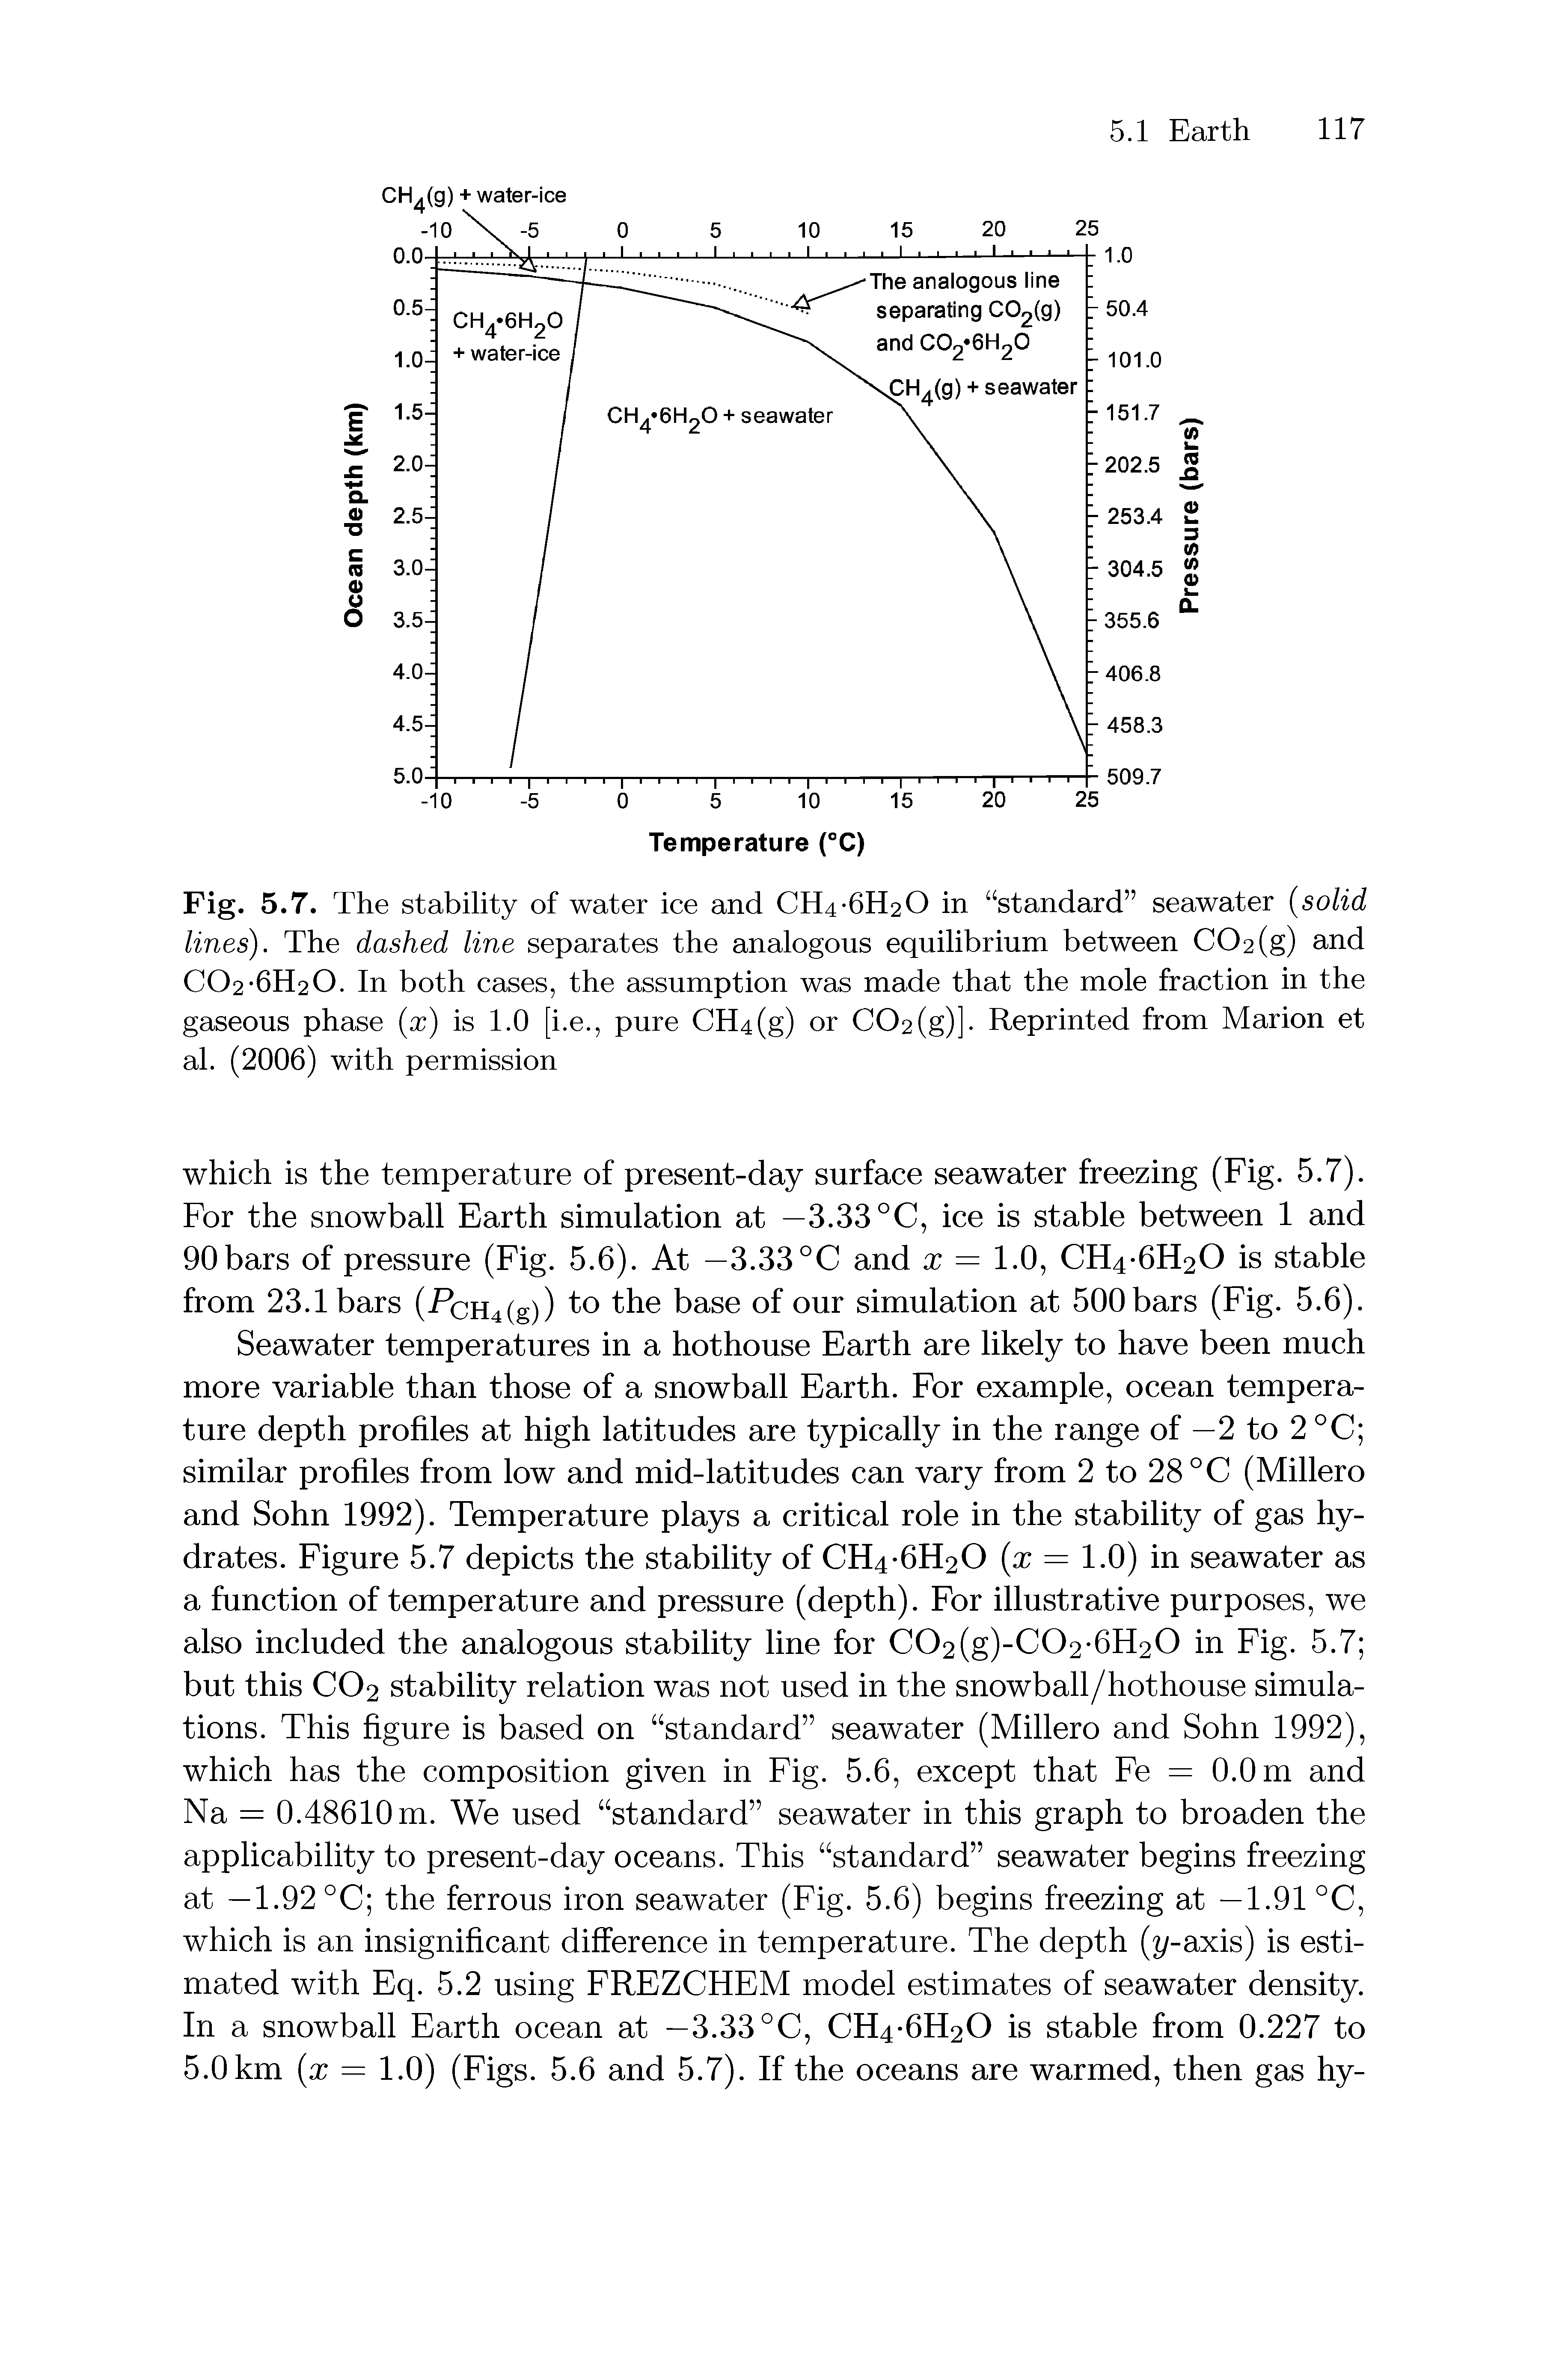 Fig. 5.7. The stability of water ice and ChRThRO in standard seawater (solid lines). The dashed line separates the analogous equilibrium between C02(g) and C02-6H20. In both cases, the assumption was made that the mole fraction in the gaseous phase (x) is 1.0 [i.e., pure CH4(g) or CC>2(g)]. Reprinted from Marion et al. (2006) with permission...